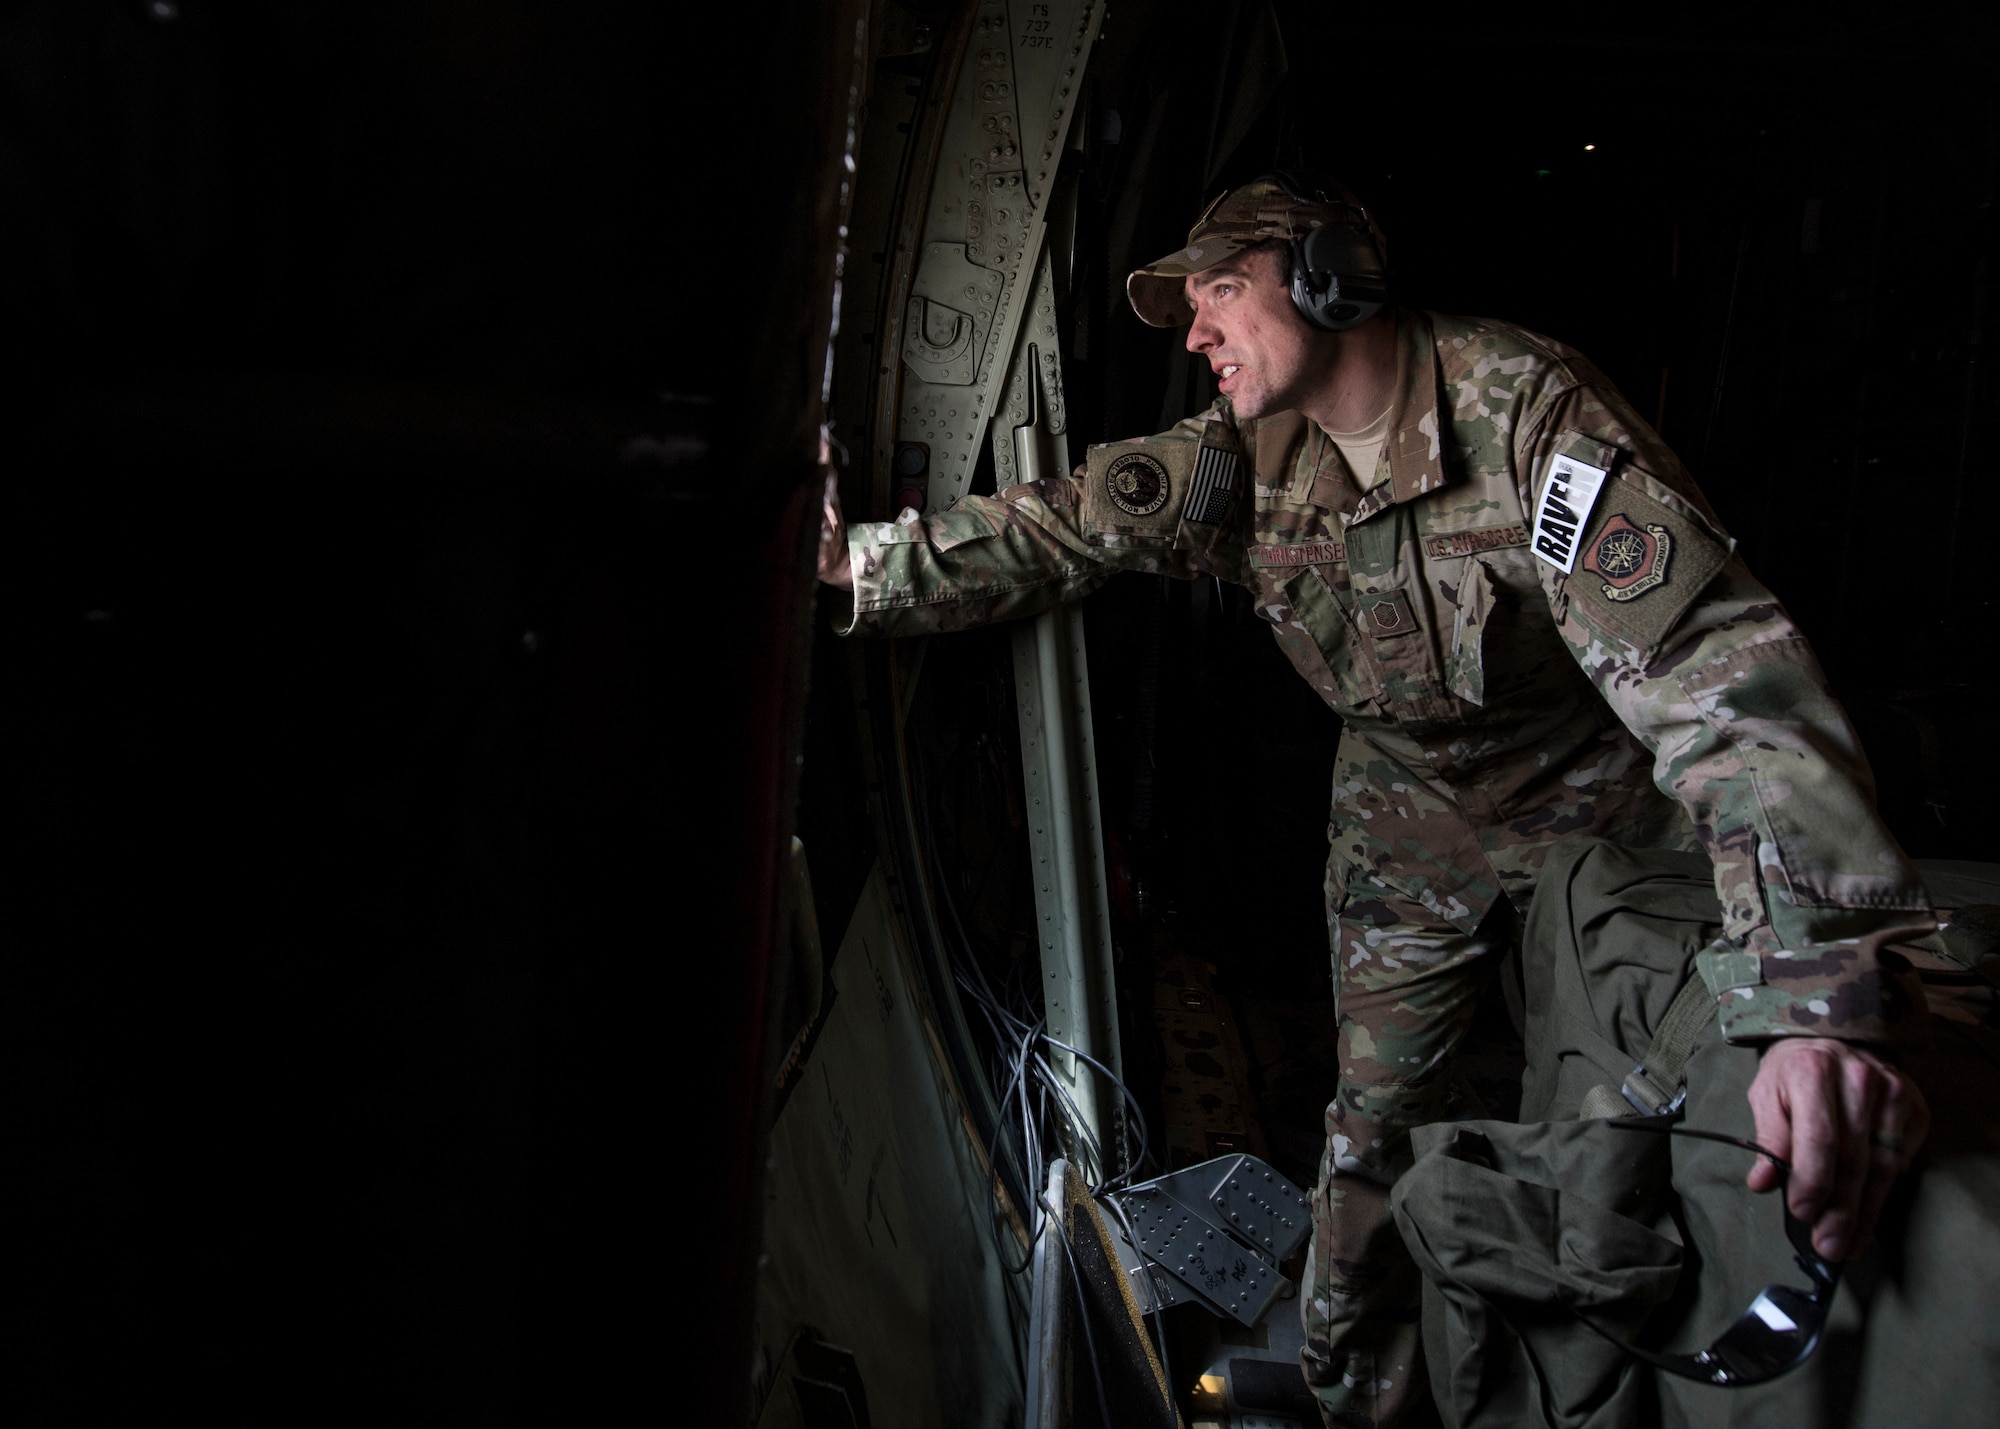 U.S. Air Force Master Sgt. Lief Christensen, 133rd Security Forces Squadron, Minnesota Air National Guard Phoenix Raven team leader, checks outside after landing in a C-130J Super Hercules at Kaedi Airfield, Mauritania, Feb. 22, 2020.